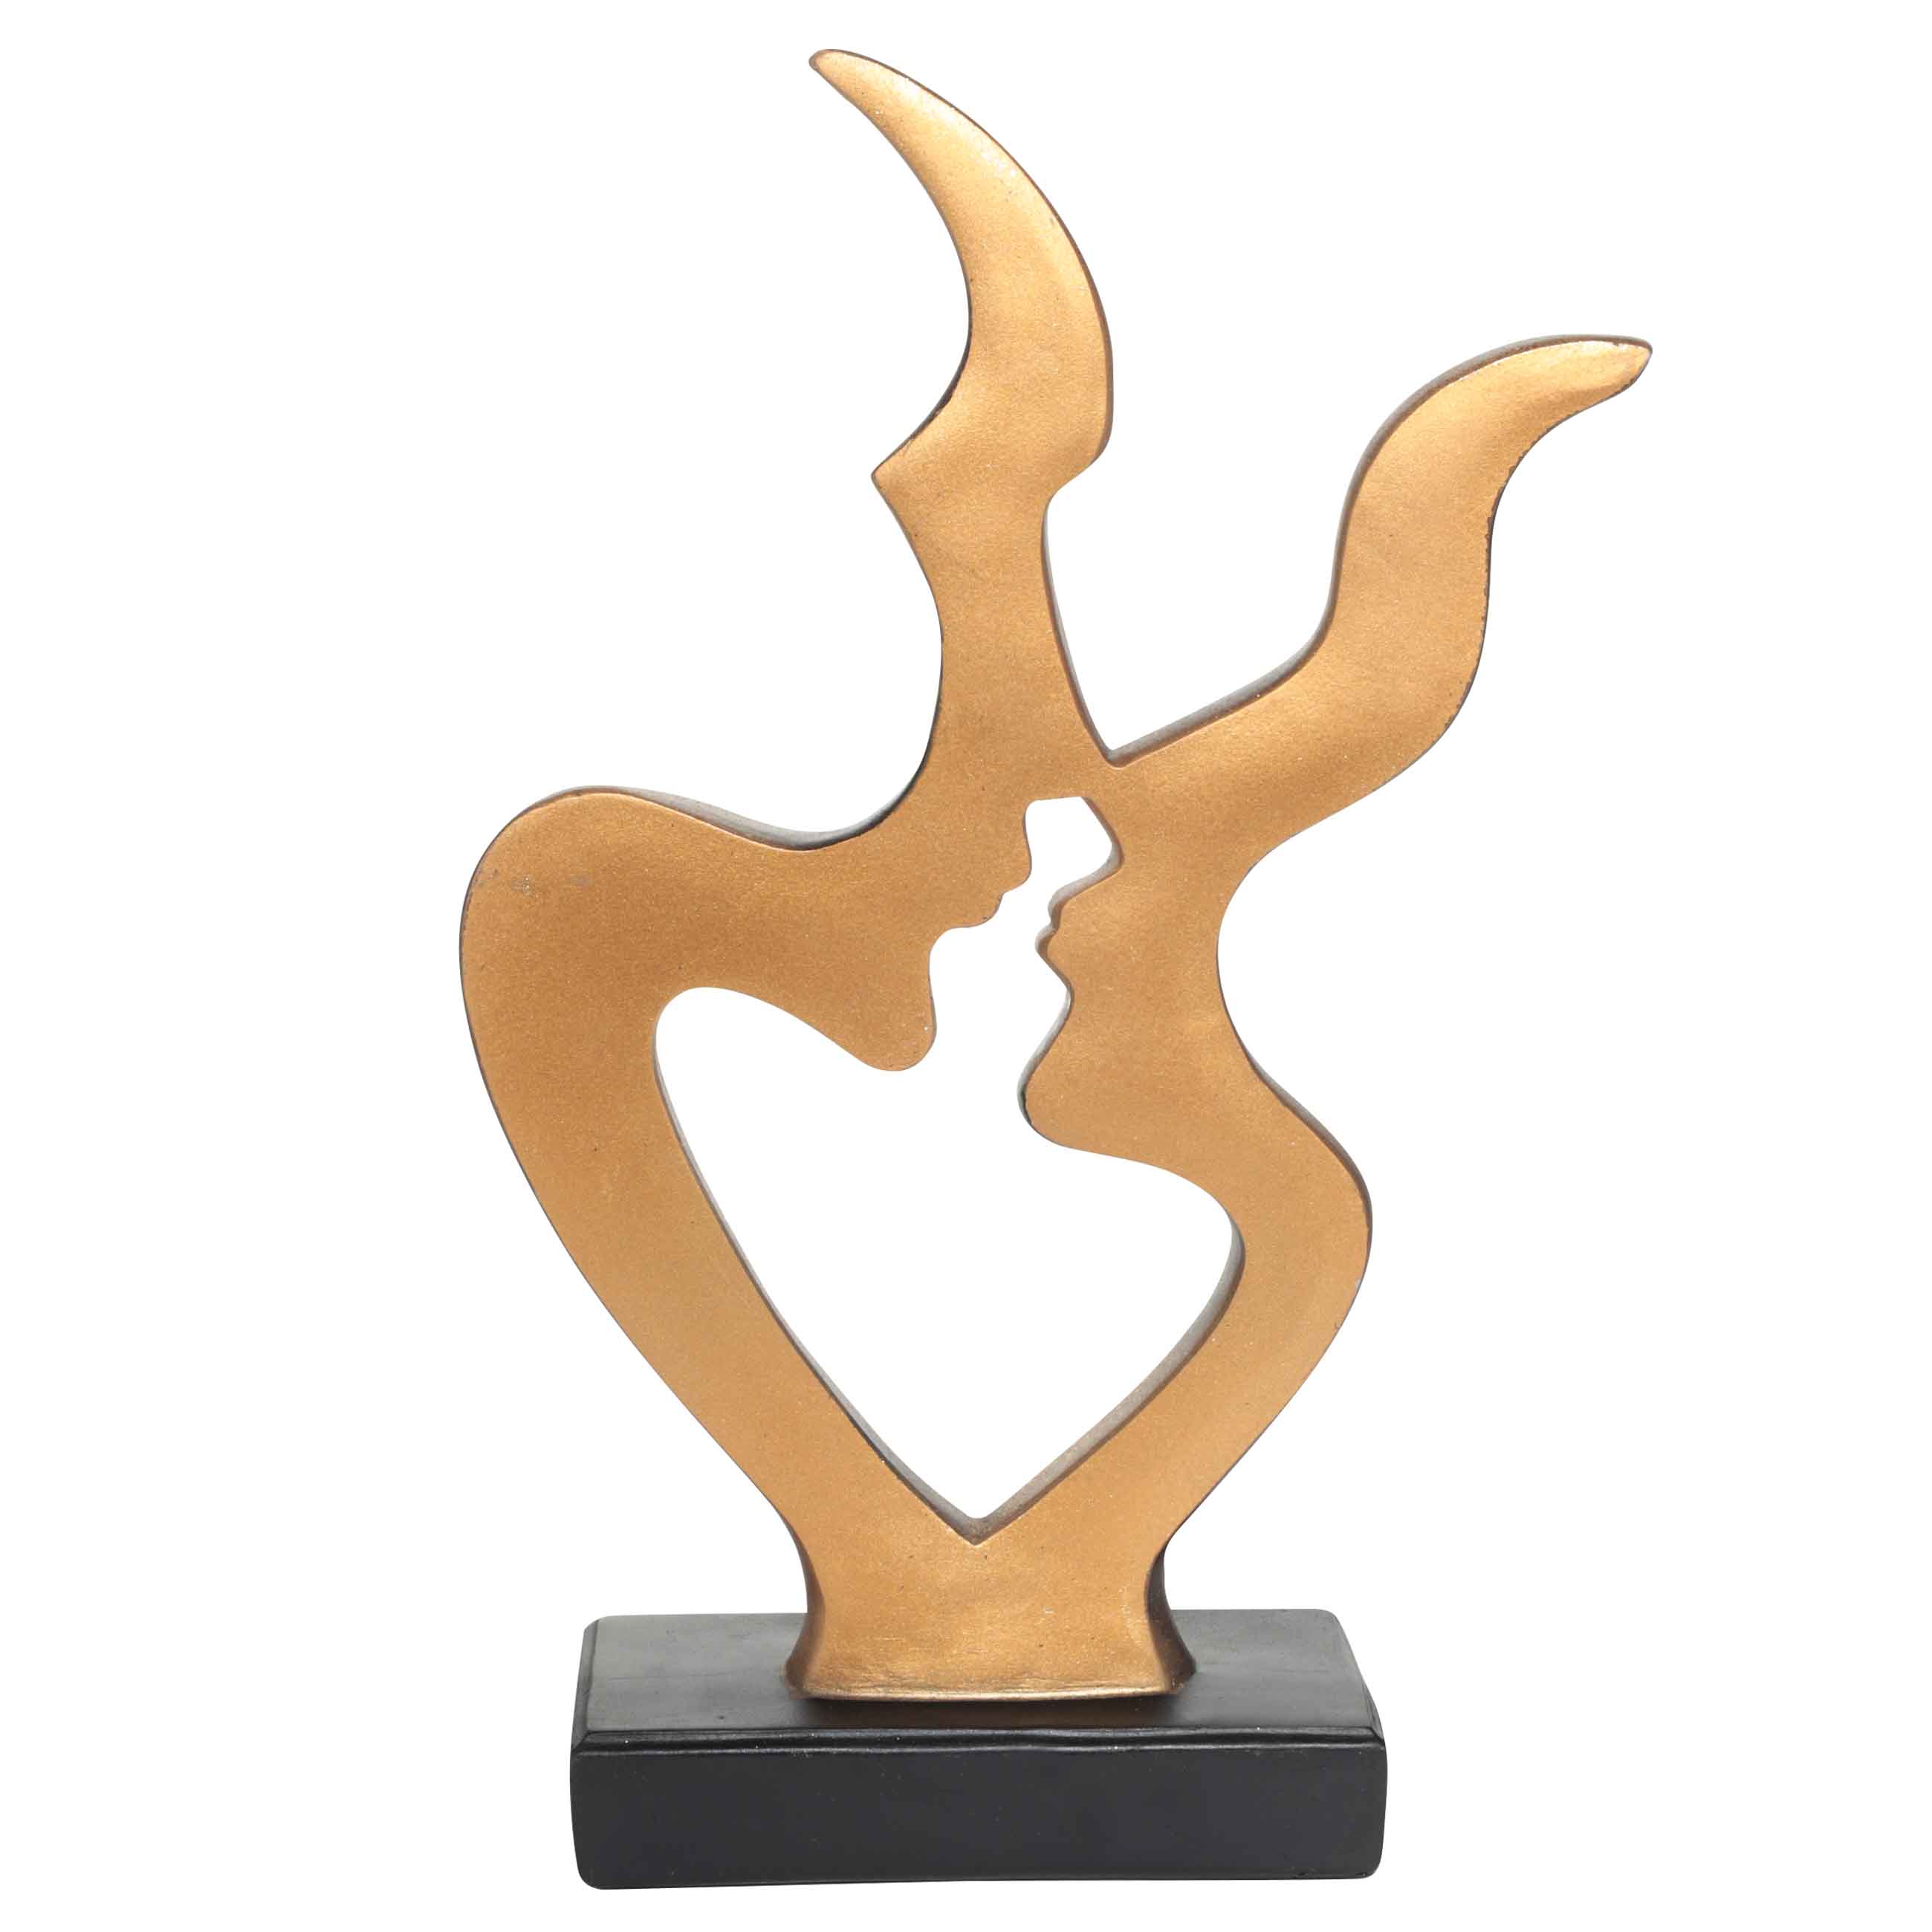 Statuette, 35 cm, polyresin, black and gold, Silhouette of a kiss, Baise изображение № 3